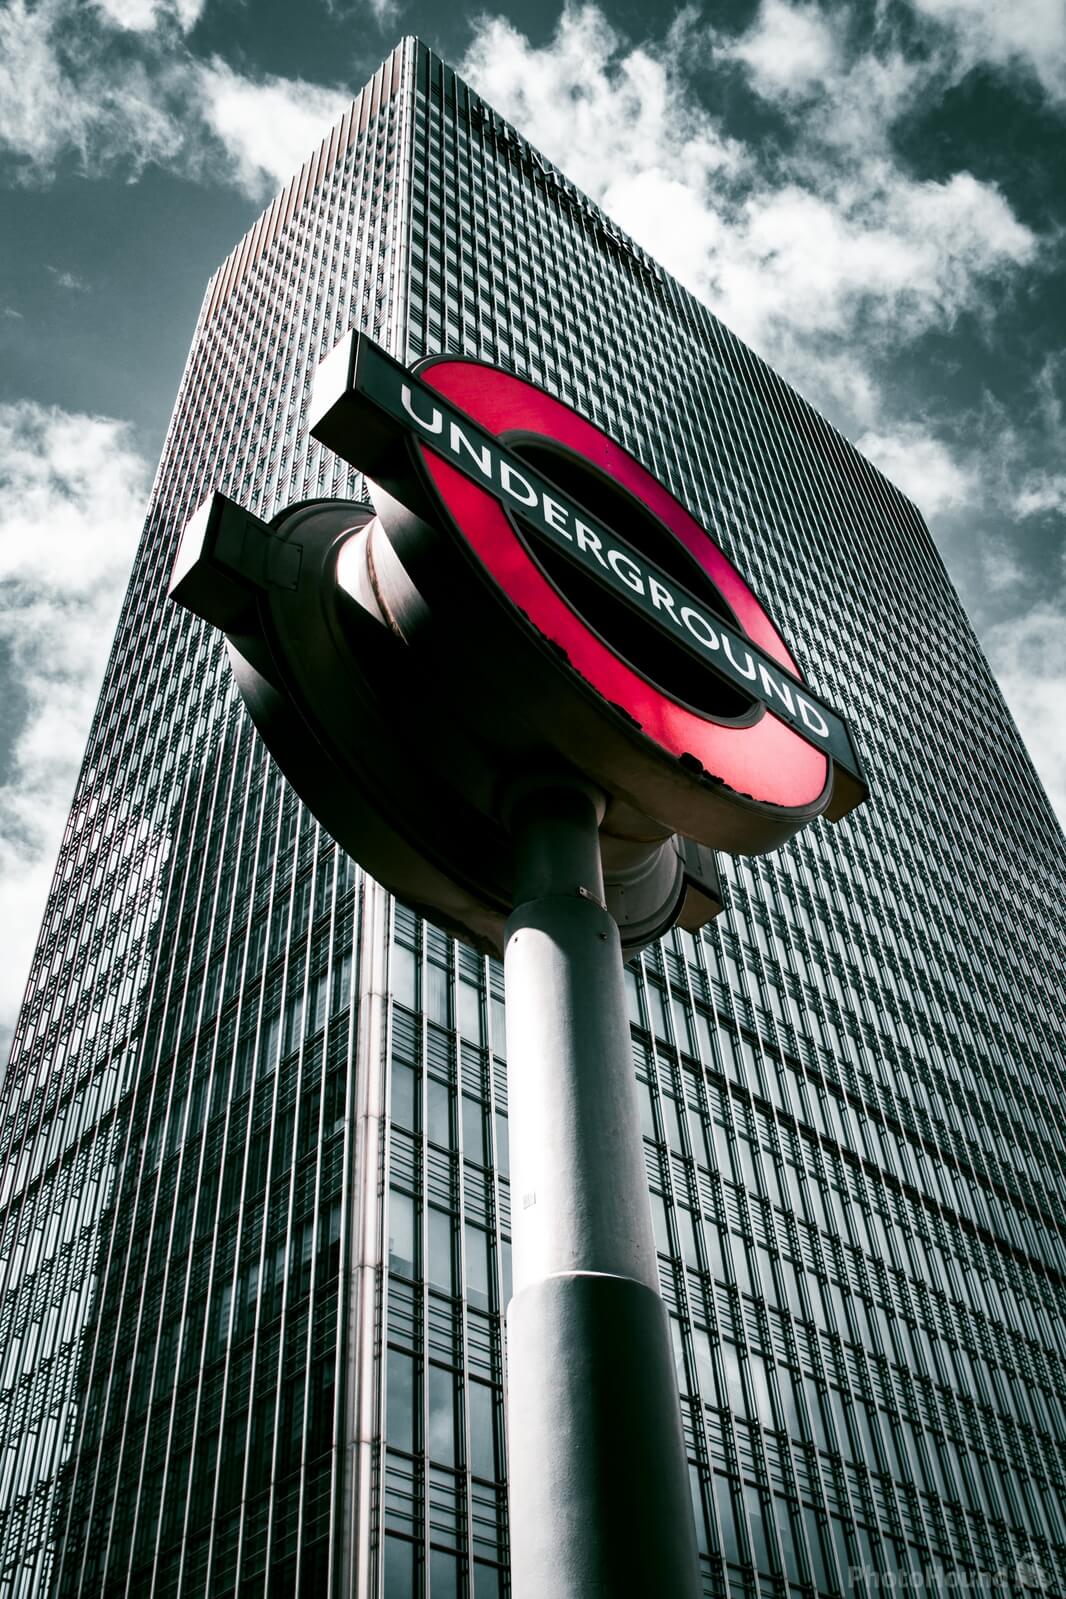 Image of JP Morgan Bank by Andy Paterson